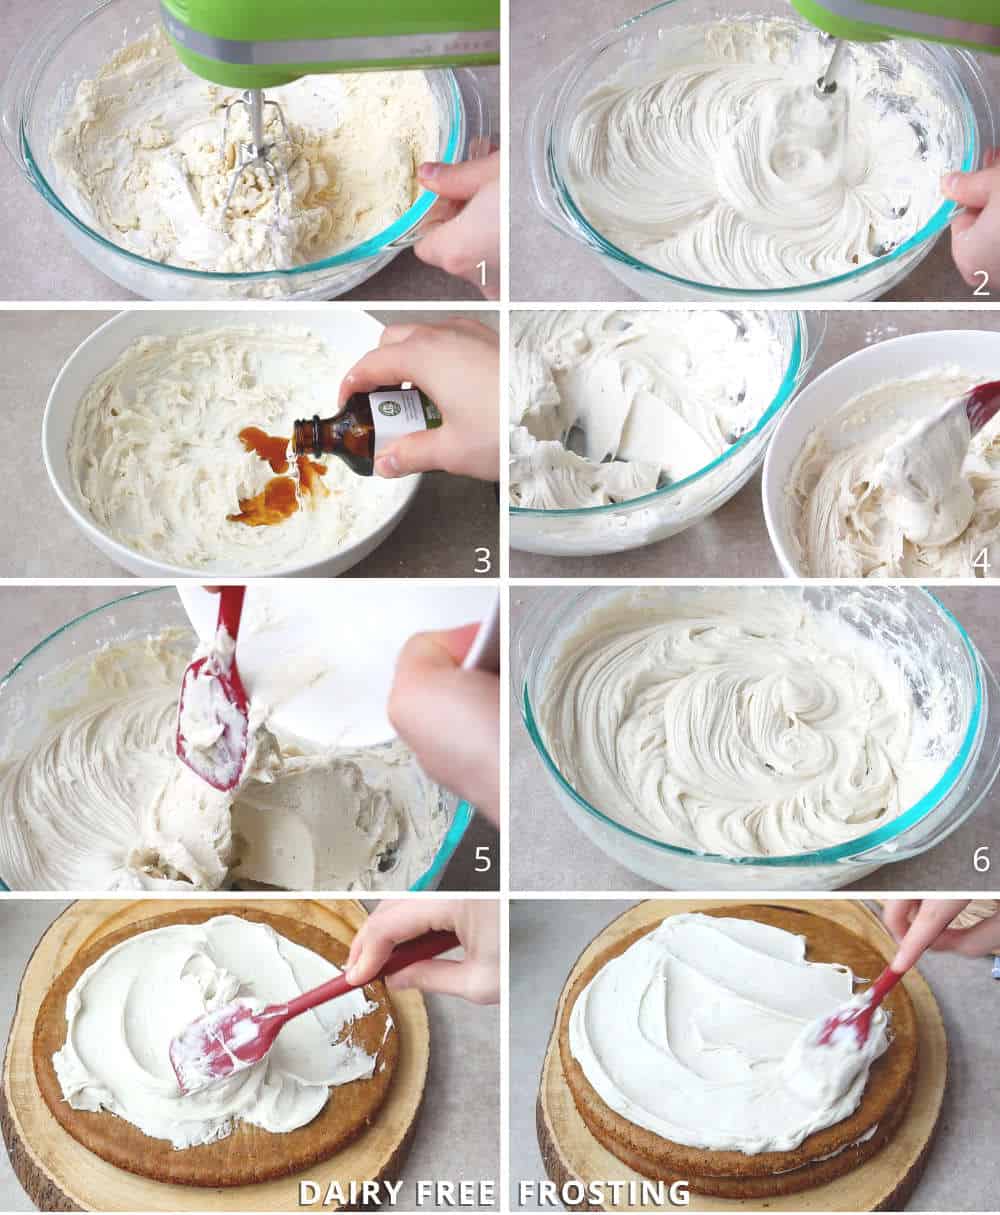 How to make dairy free frosting for gluten free banana cake